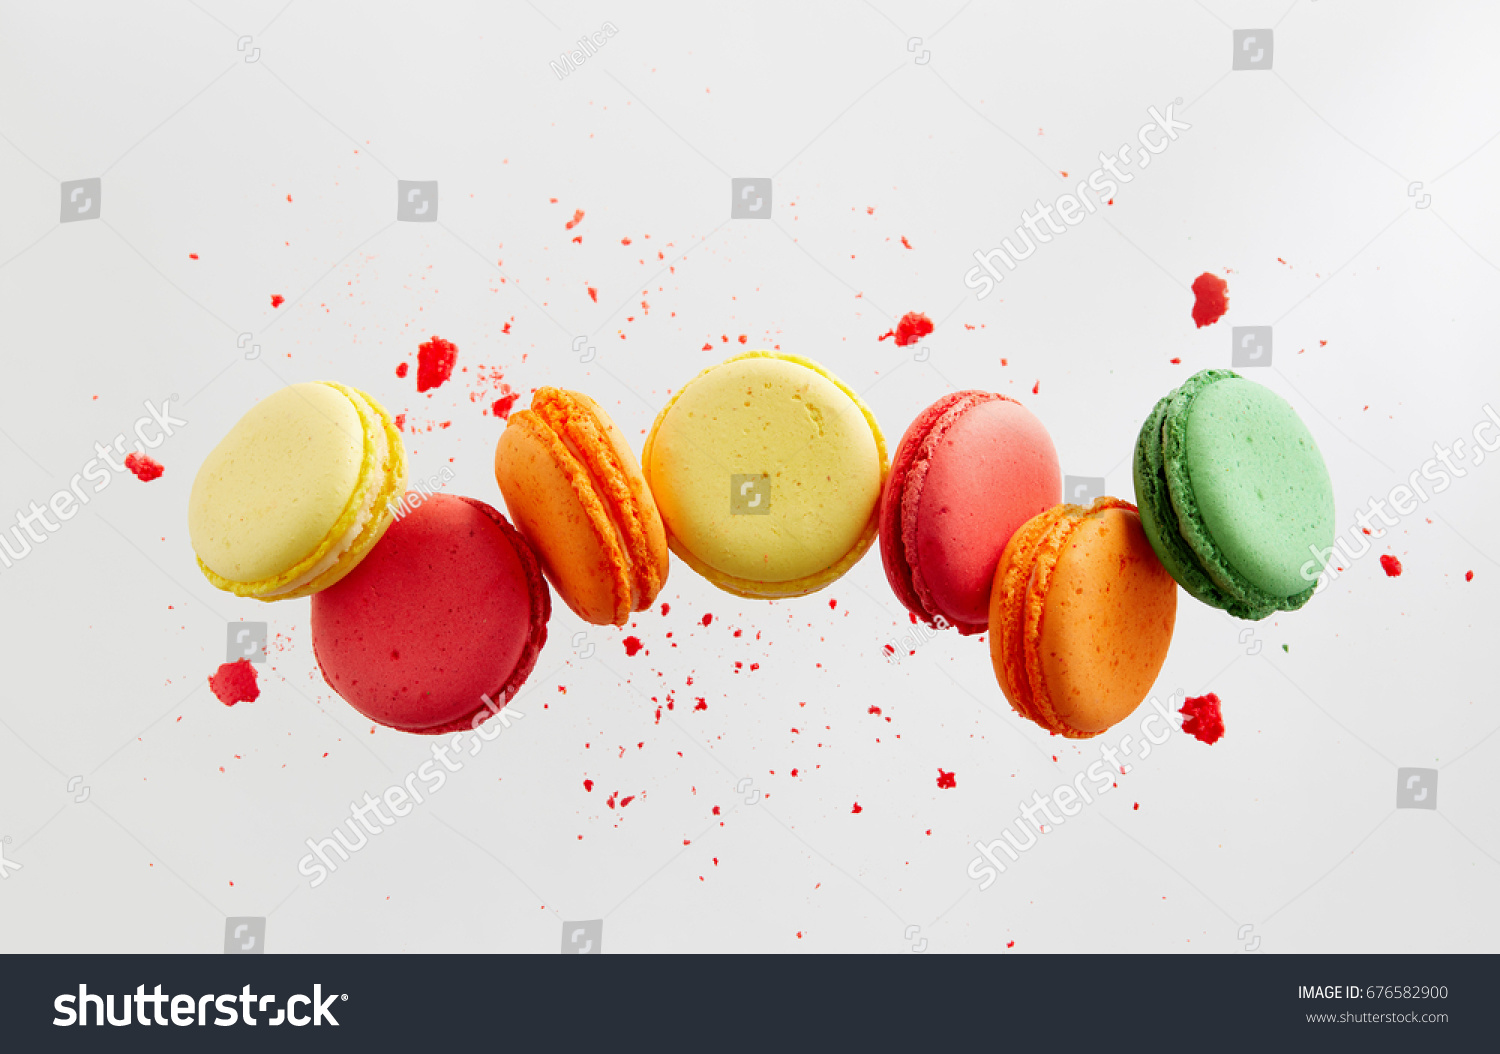 Colorful macarons cakes. Small French cakes. Sweet and colorful french macaroons falling or flying in motion. #676582900